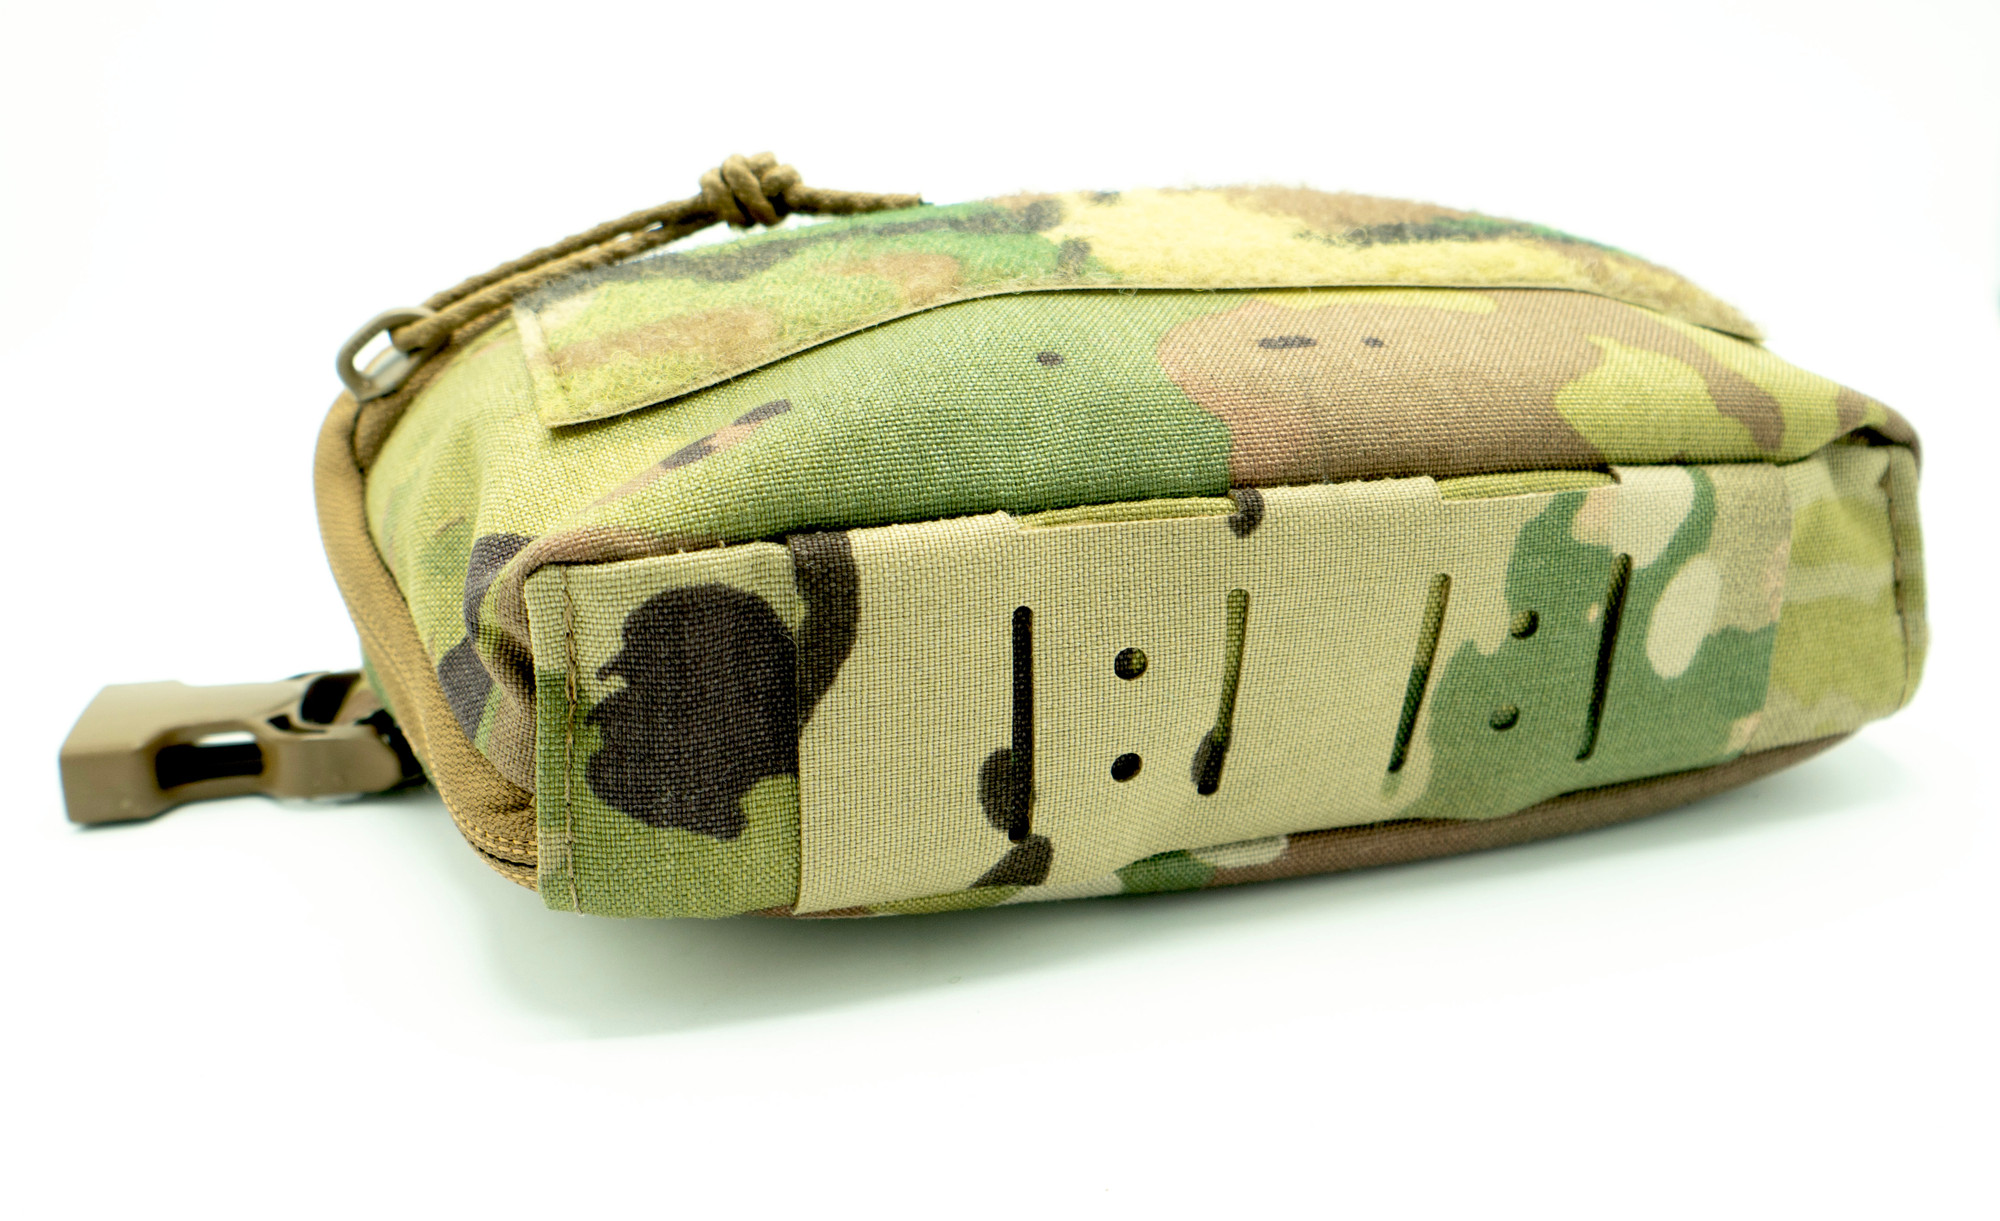 T3 Tactical Fanny Pack: Multi-purpose waist pack